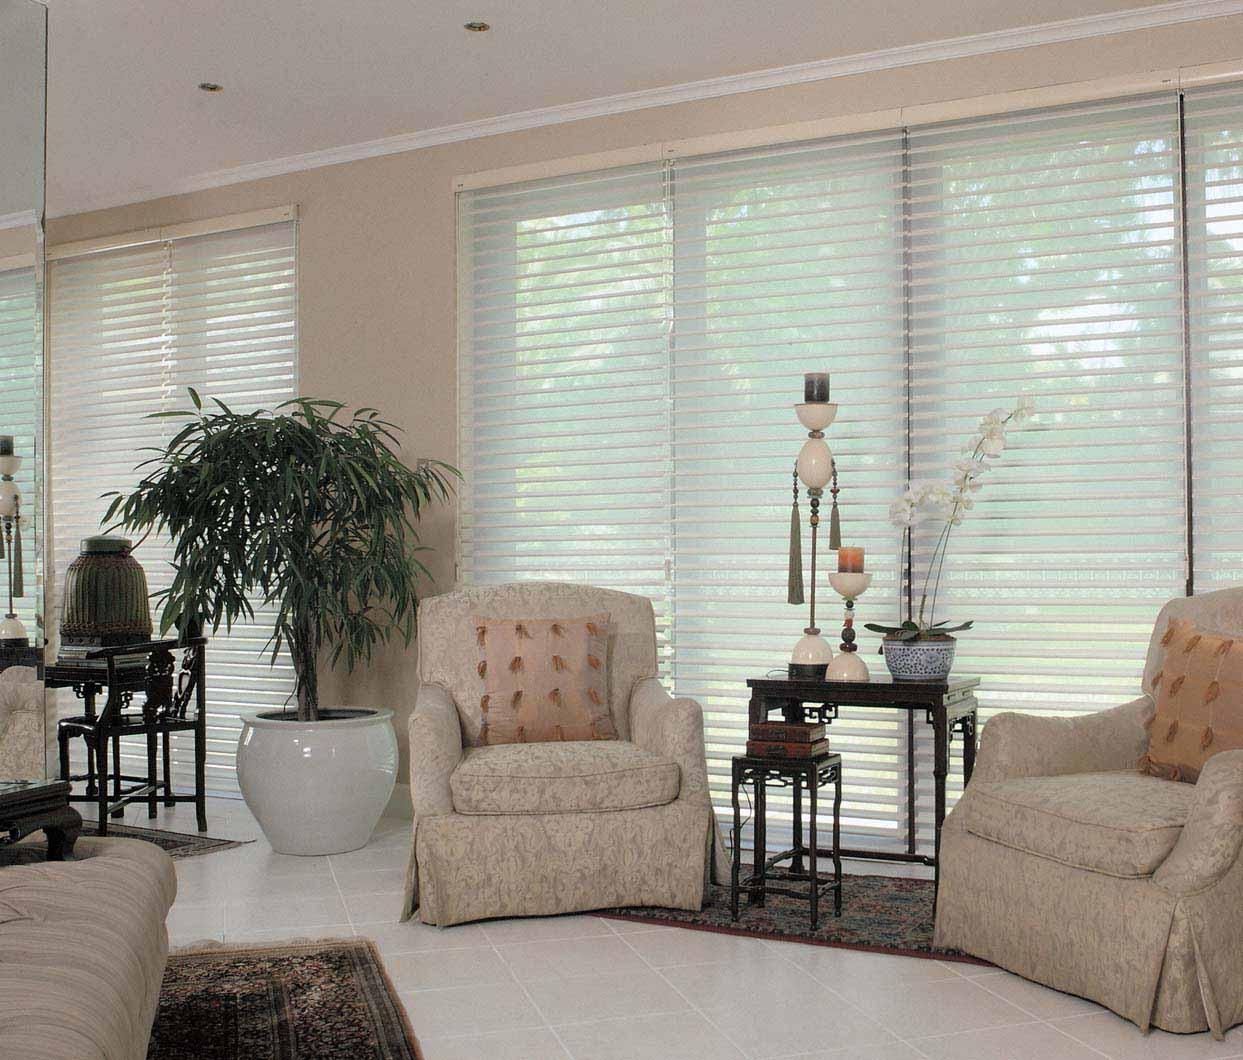 VIVA ARCTIC Details about   Sofidecora Window Roller Shades Room Blinds Blackout Office & Home 